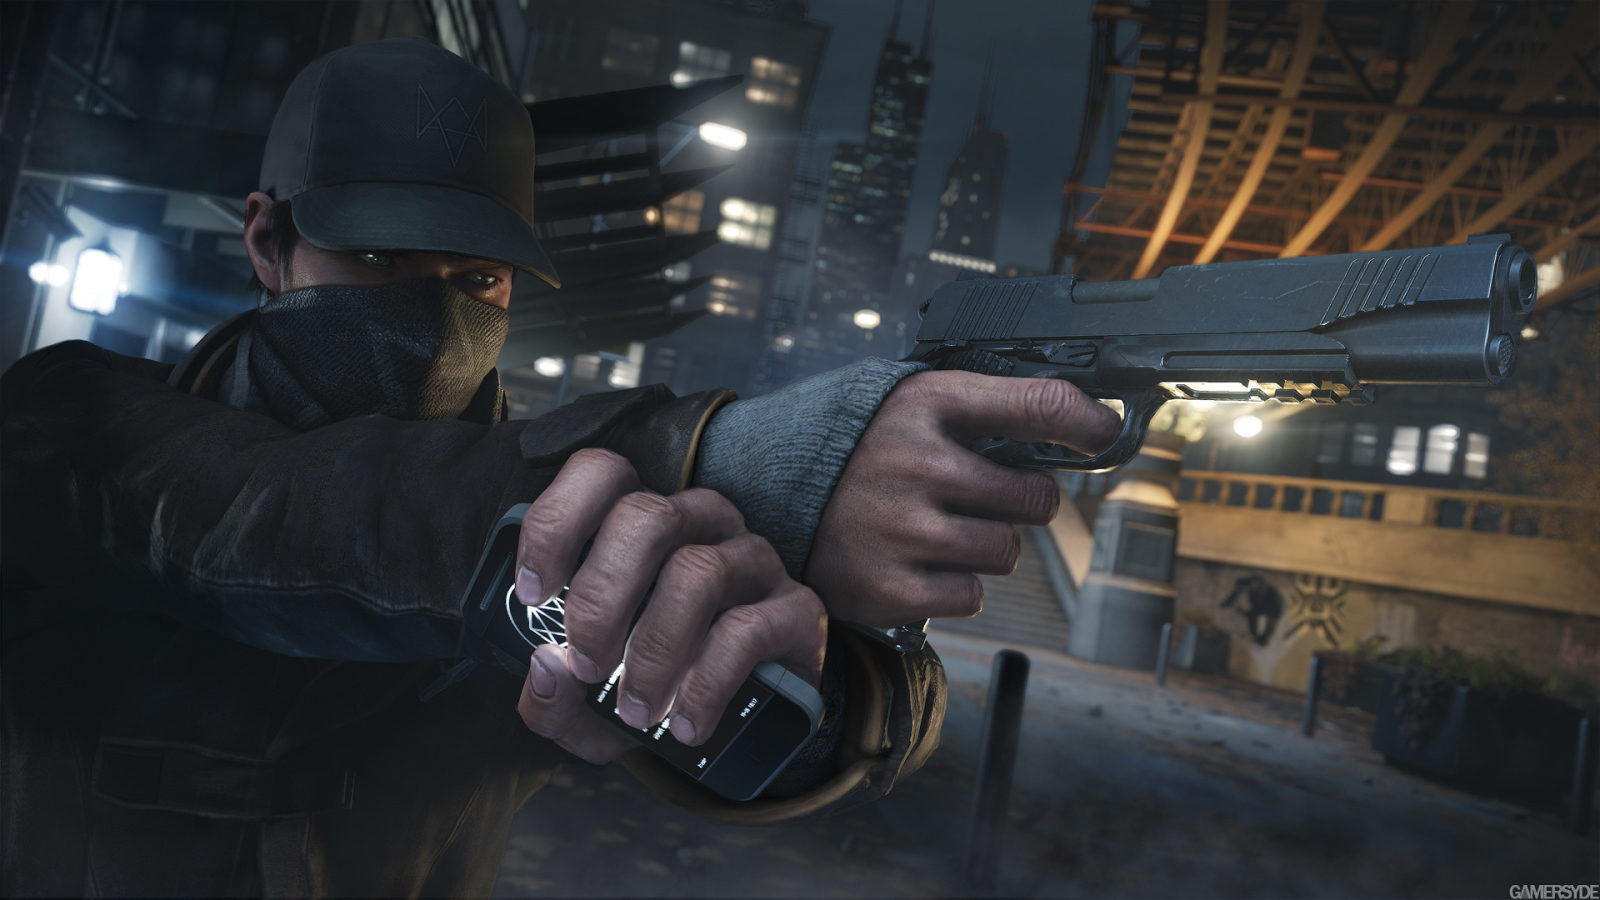 Watch Dogs: aim and fire